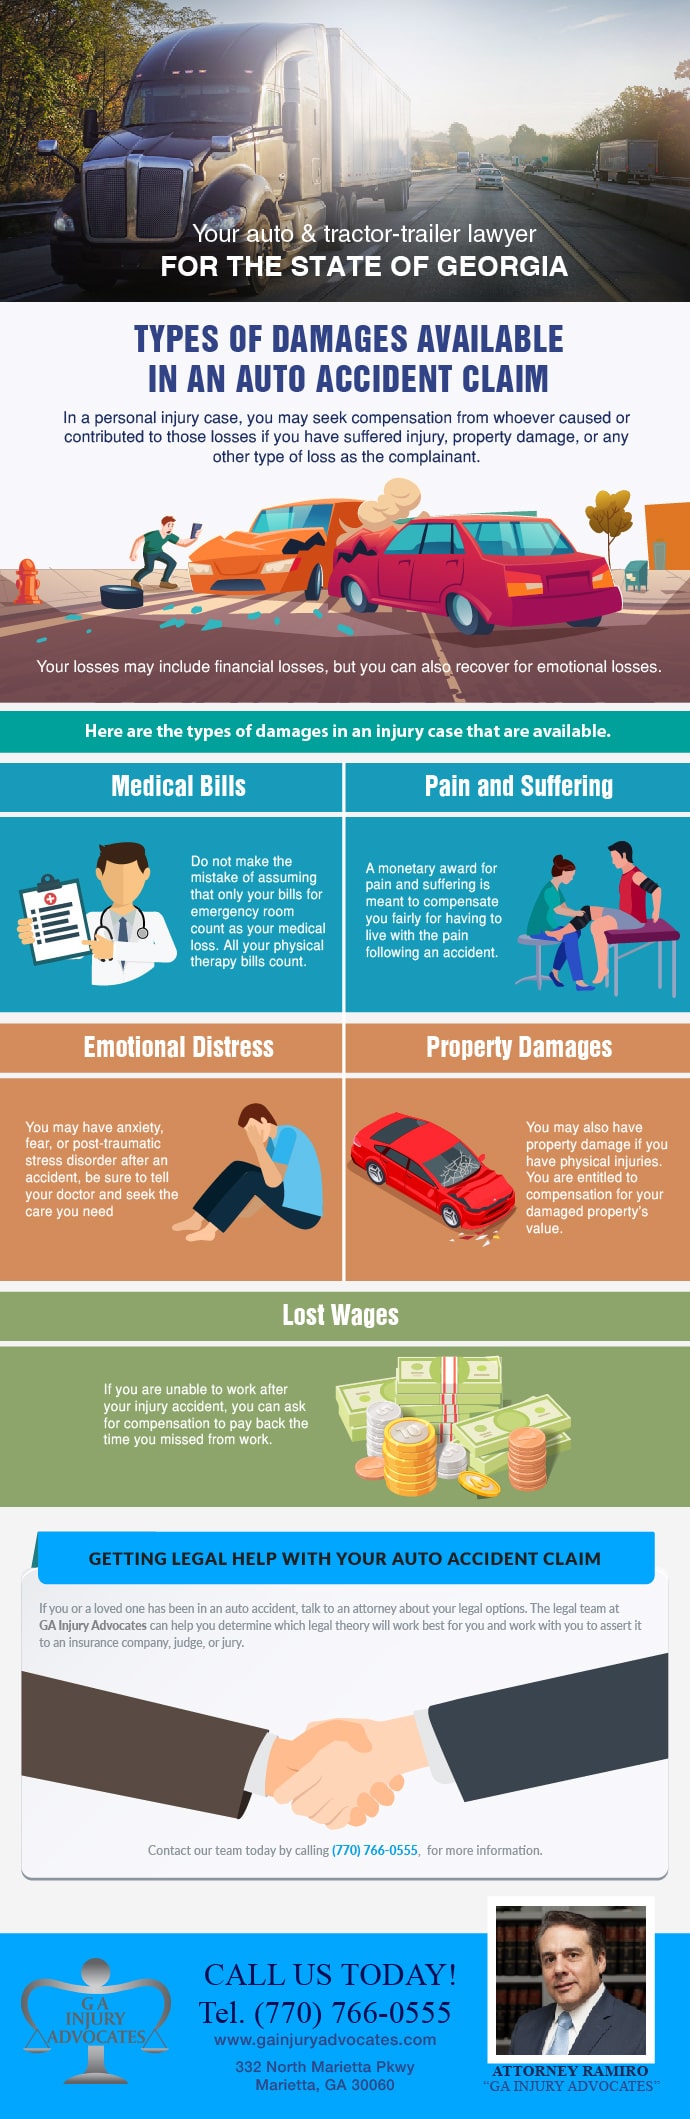 Types of Damages Available in an Auto Accident Claim